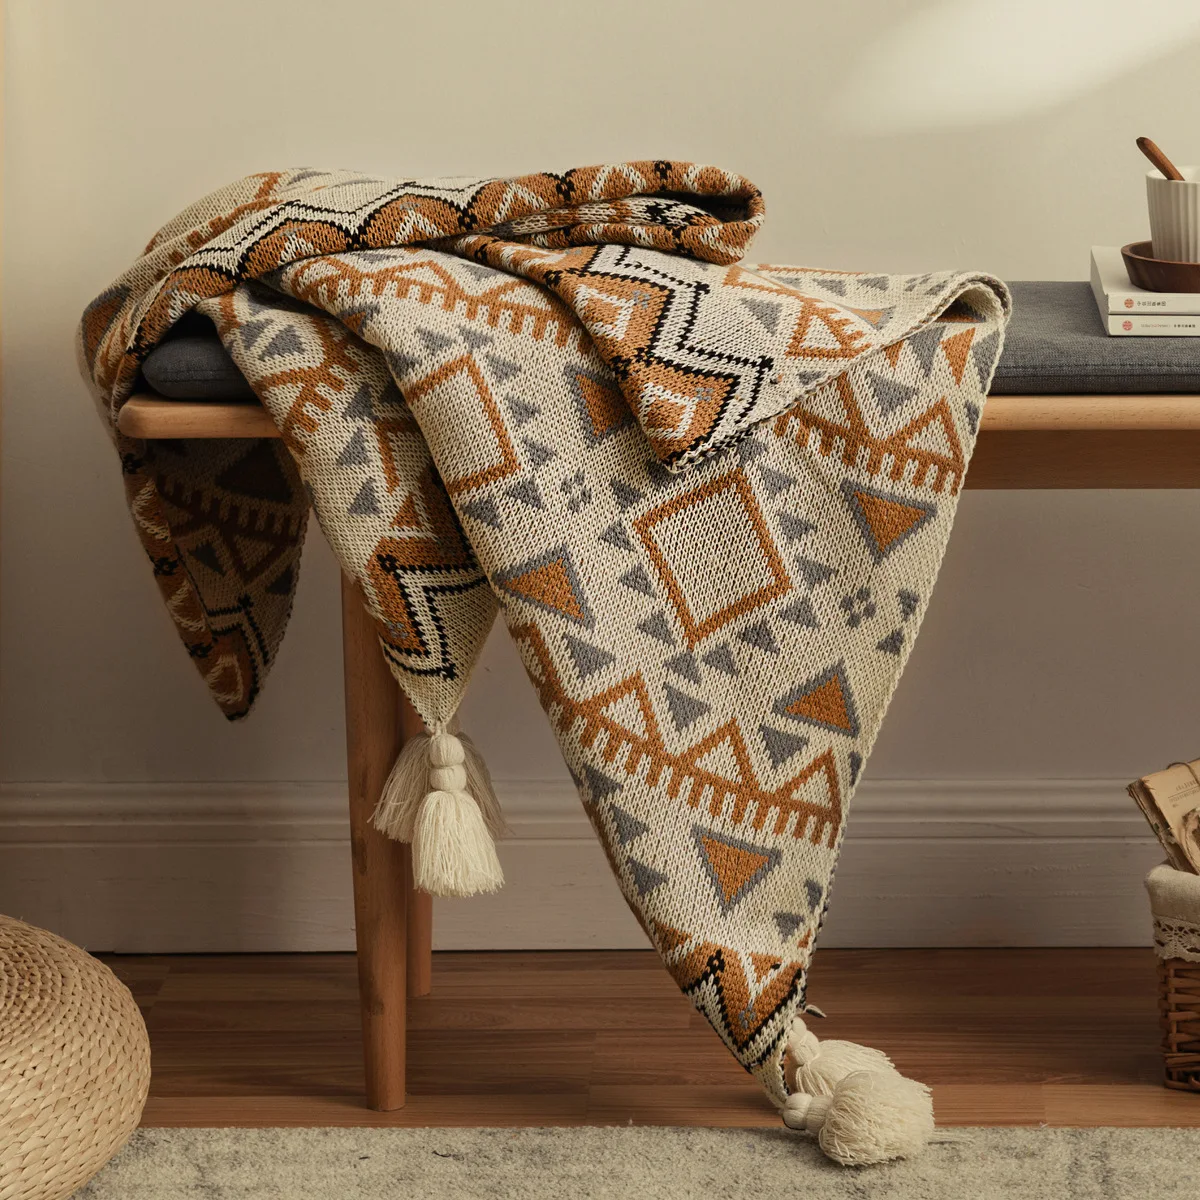 

Boho Blanket Knitted Tassel Brown Throw Blankets Lightweight Vintage Tan Blanket for Sofa Couch Bed All Seasons (50x60 Inch)